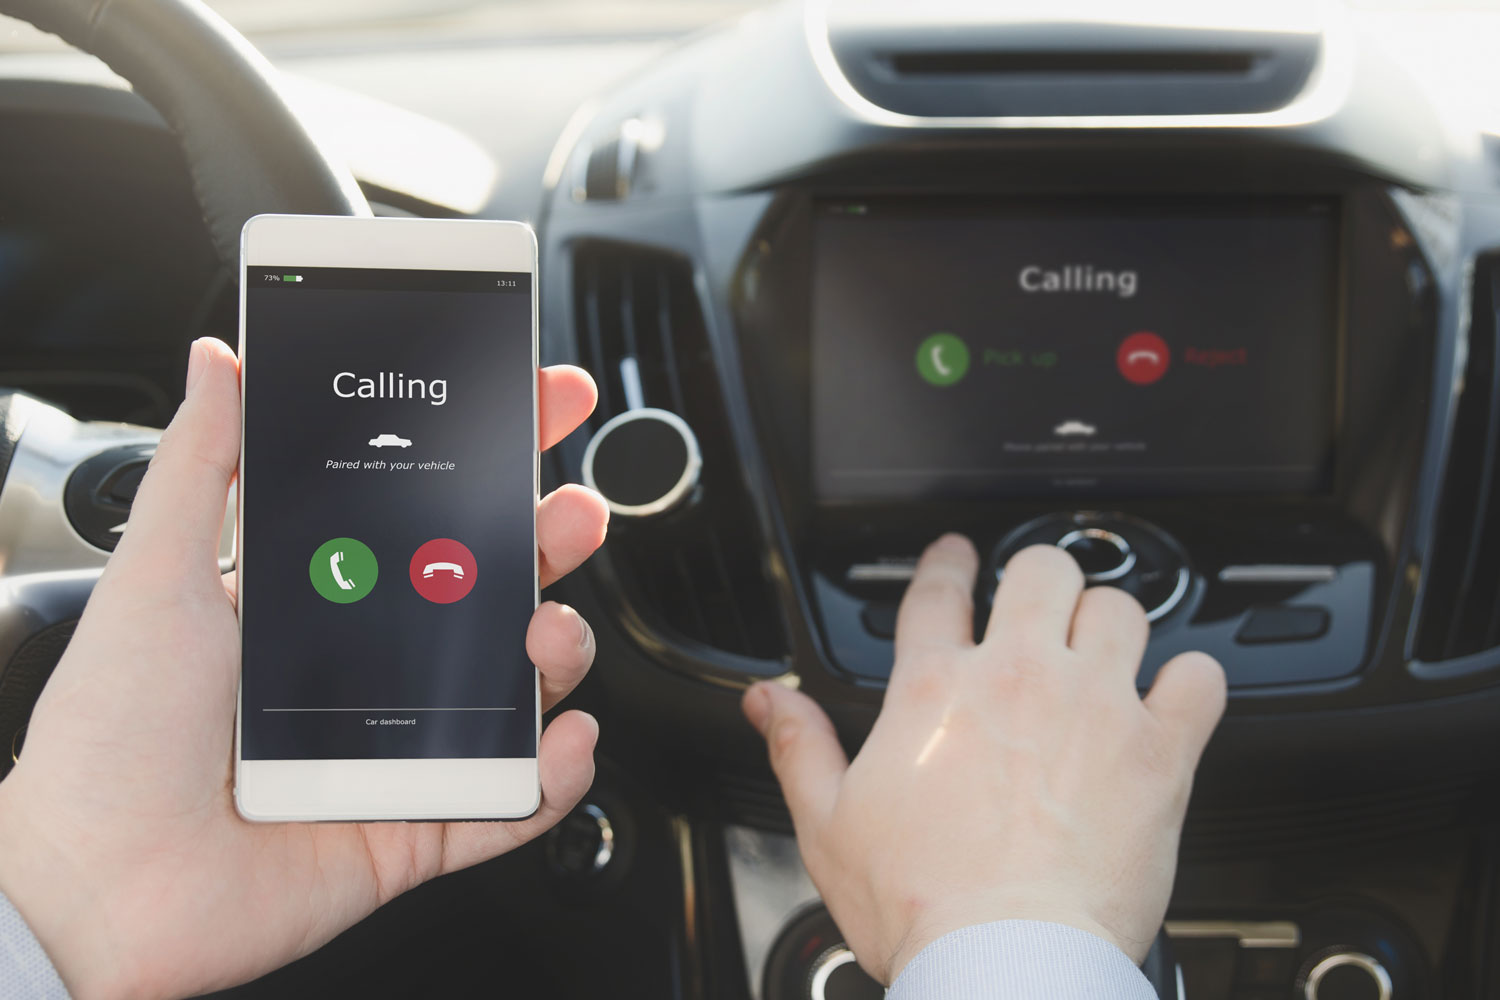 https://autoimage.capitalone.com/cms/Auto/assets/images/2408-hero-bluetooth-calling-in-a-car.jpg